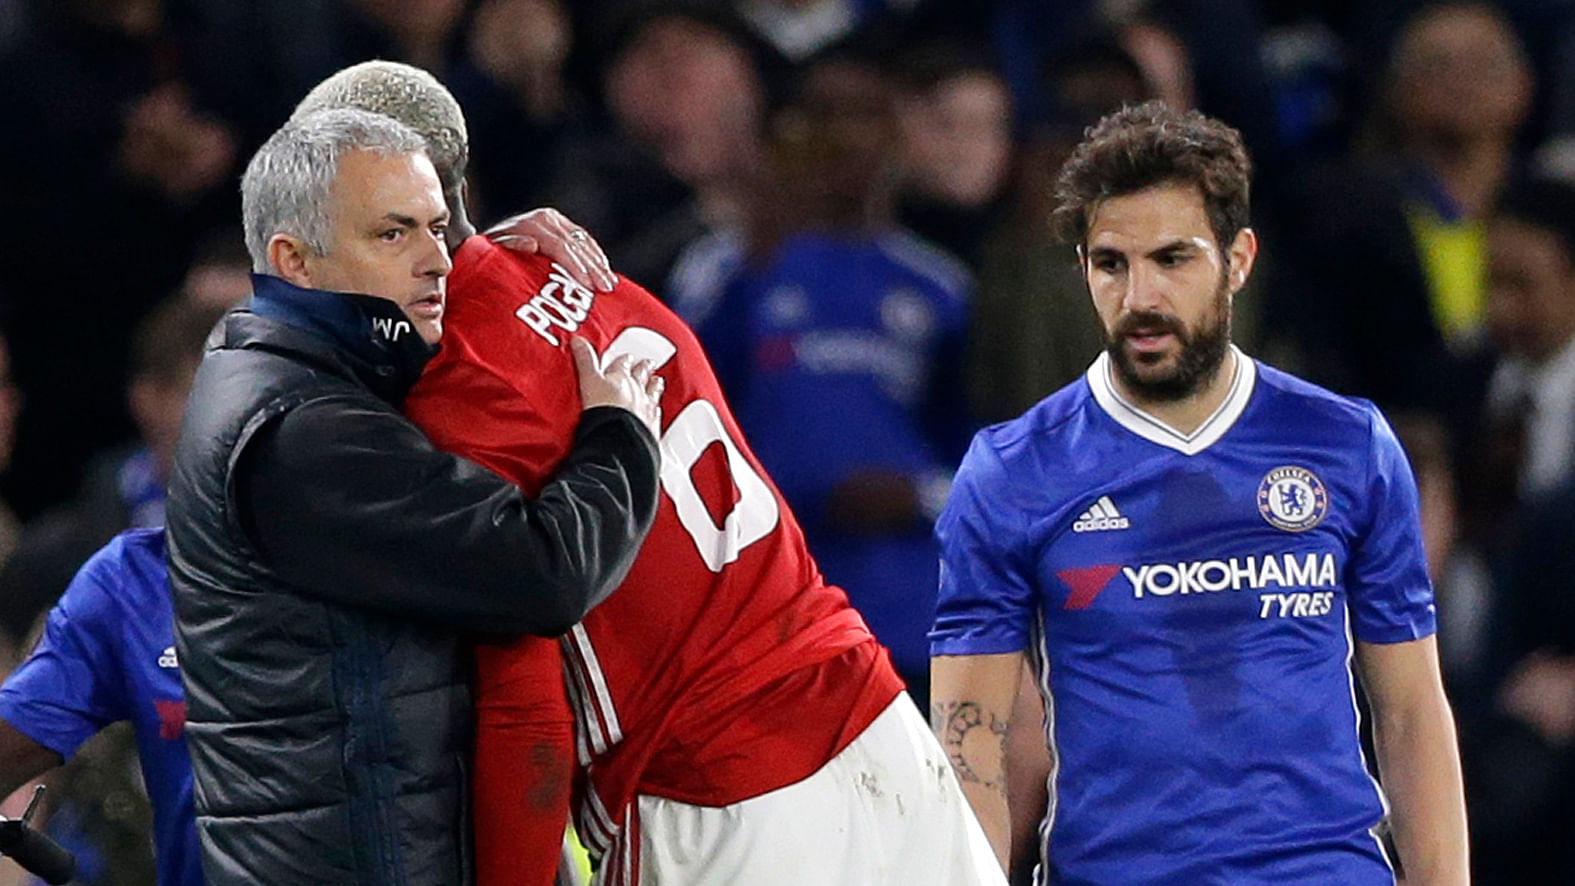 Manchester United’s manager Jose Mourinho embraces his player Paul Pogba as Chelsea’s Cesc Fabregas watches following their English FA Cup quarterfinal soccer match between Chelsea and Manchester United at Stamford Bridge. (Photo: AP)